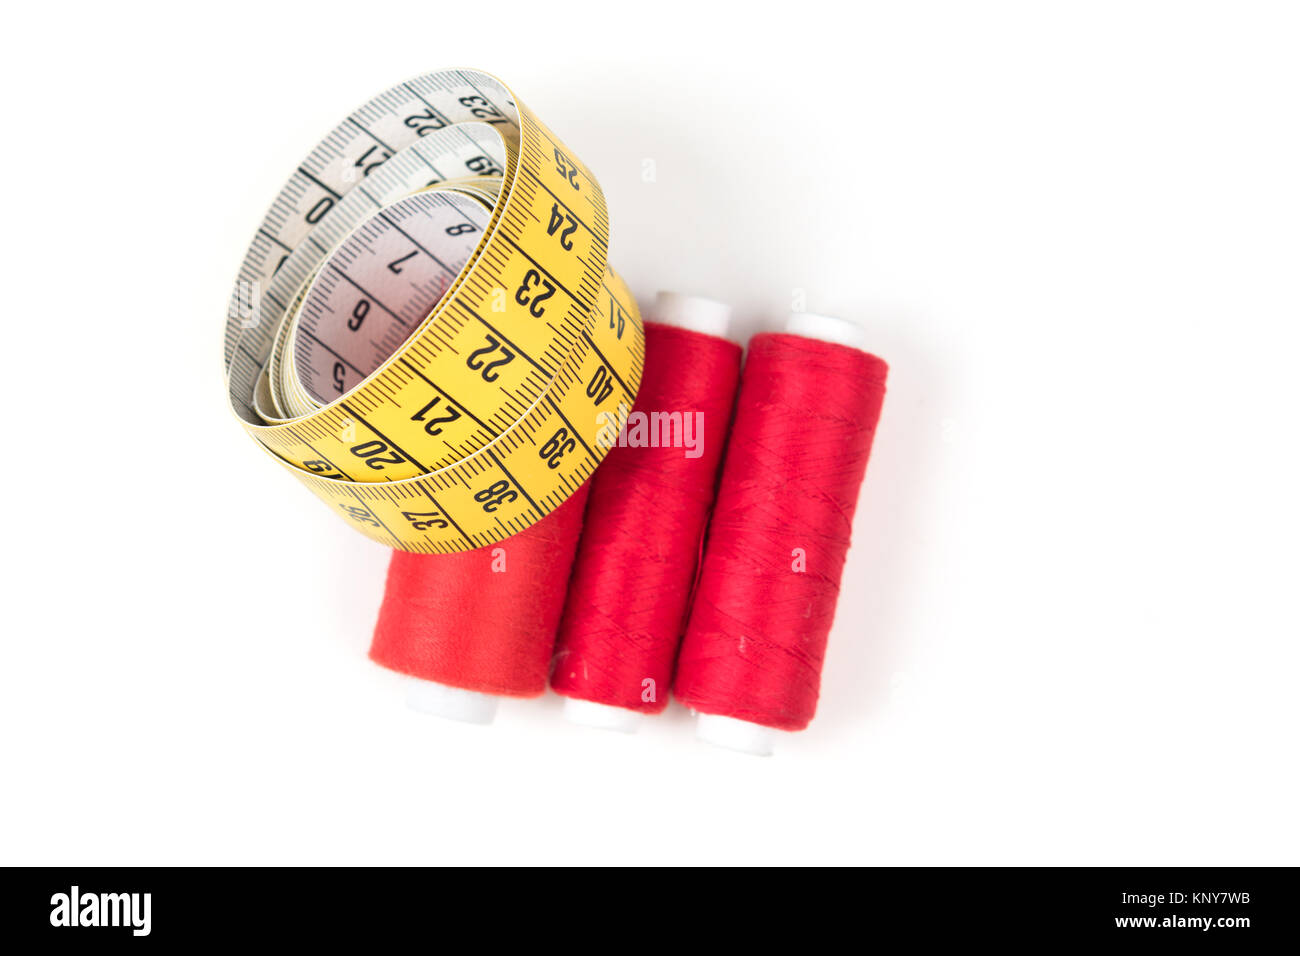 https://c8.alamy.com/comp/KNY7WB/sewing-supplies-red-thread-on-white-coil-and-yellow-measuring-tape-KNY7WB.jpg